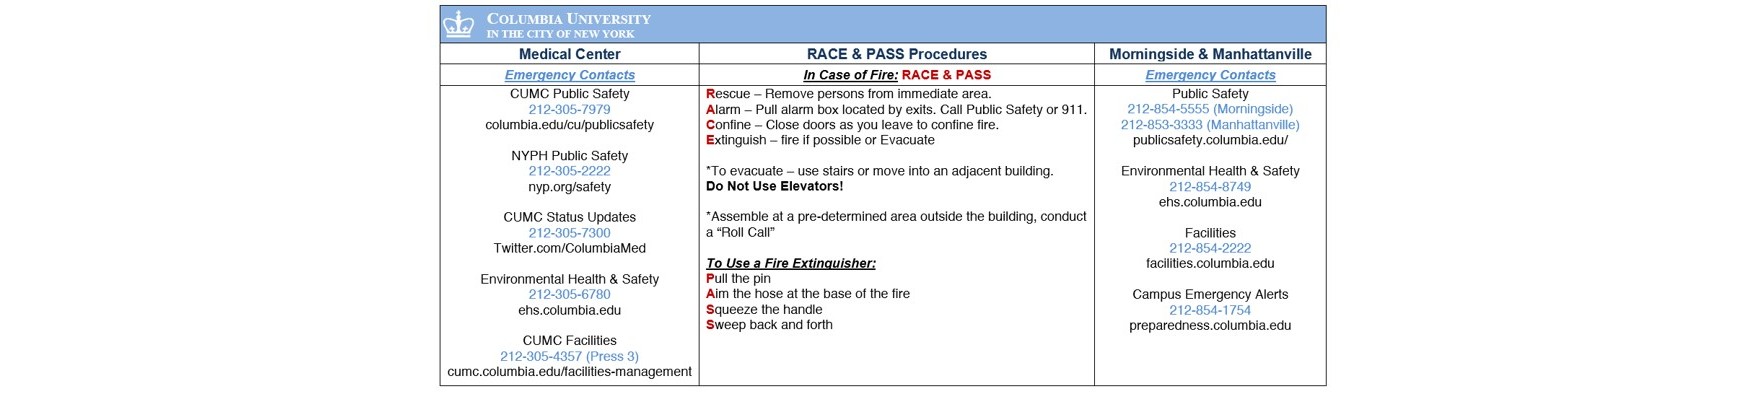 Contacts and RACE/PASS Procedures